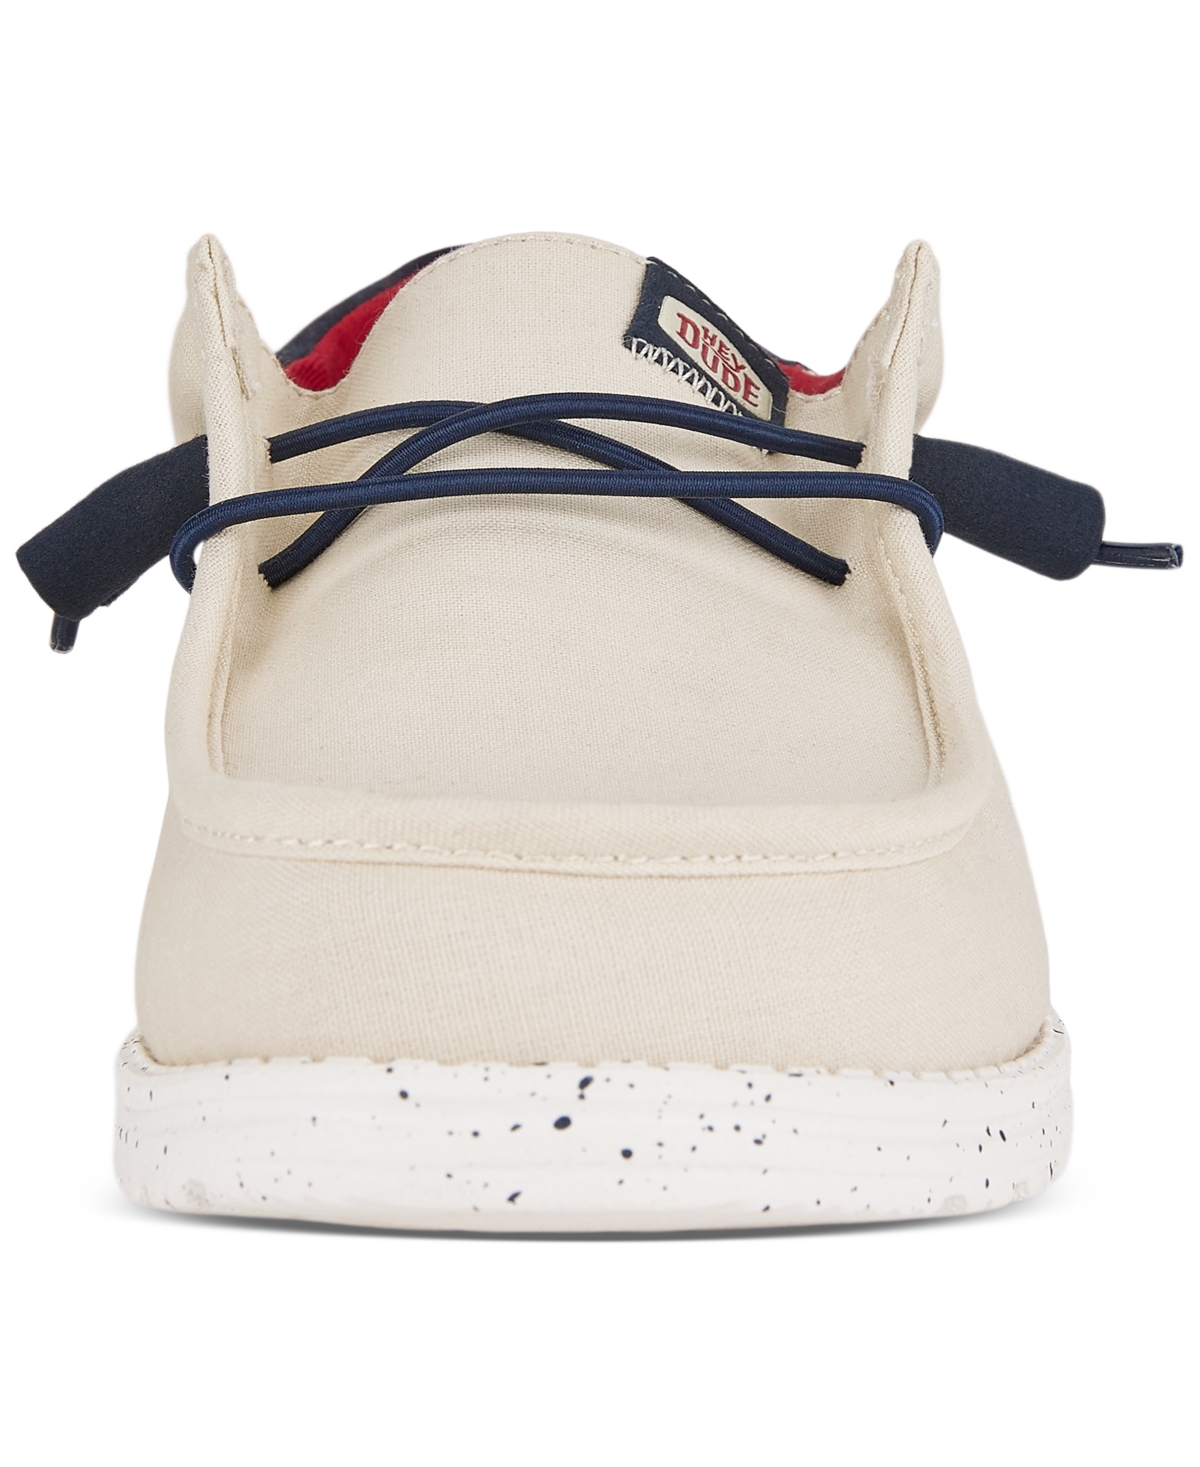 Shop Hey Dude Men's Wally Funk Americana Casual Moccasin Sneakers From Finish Line In Off White,navy,red